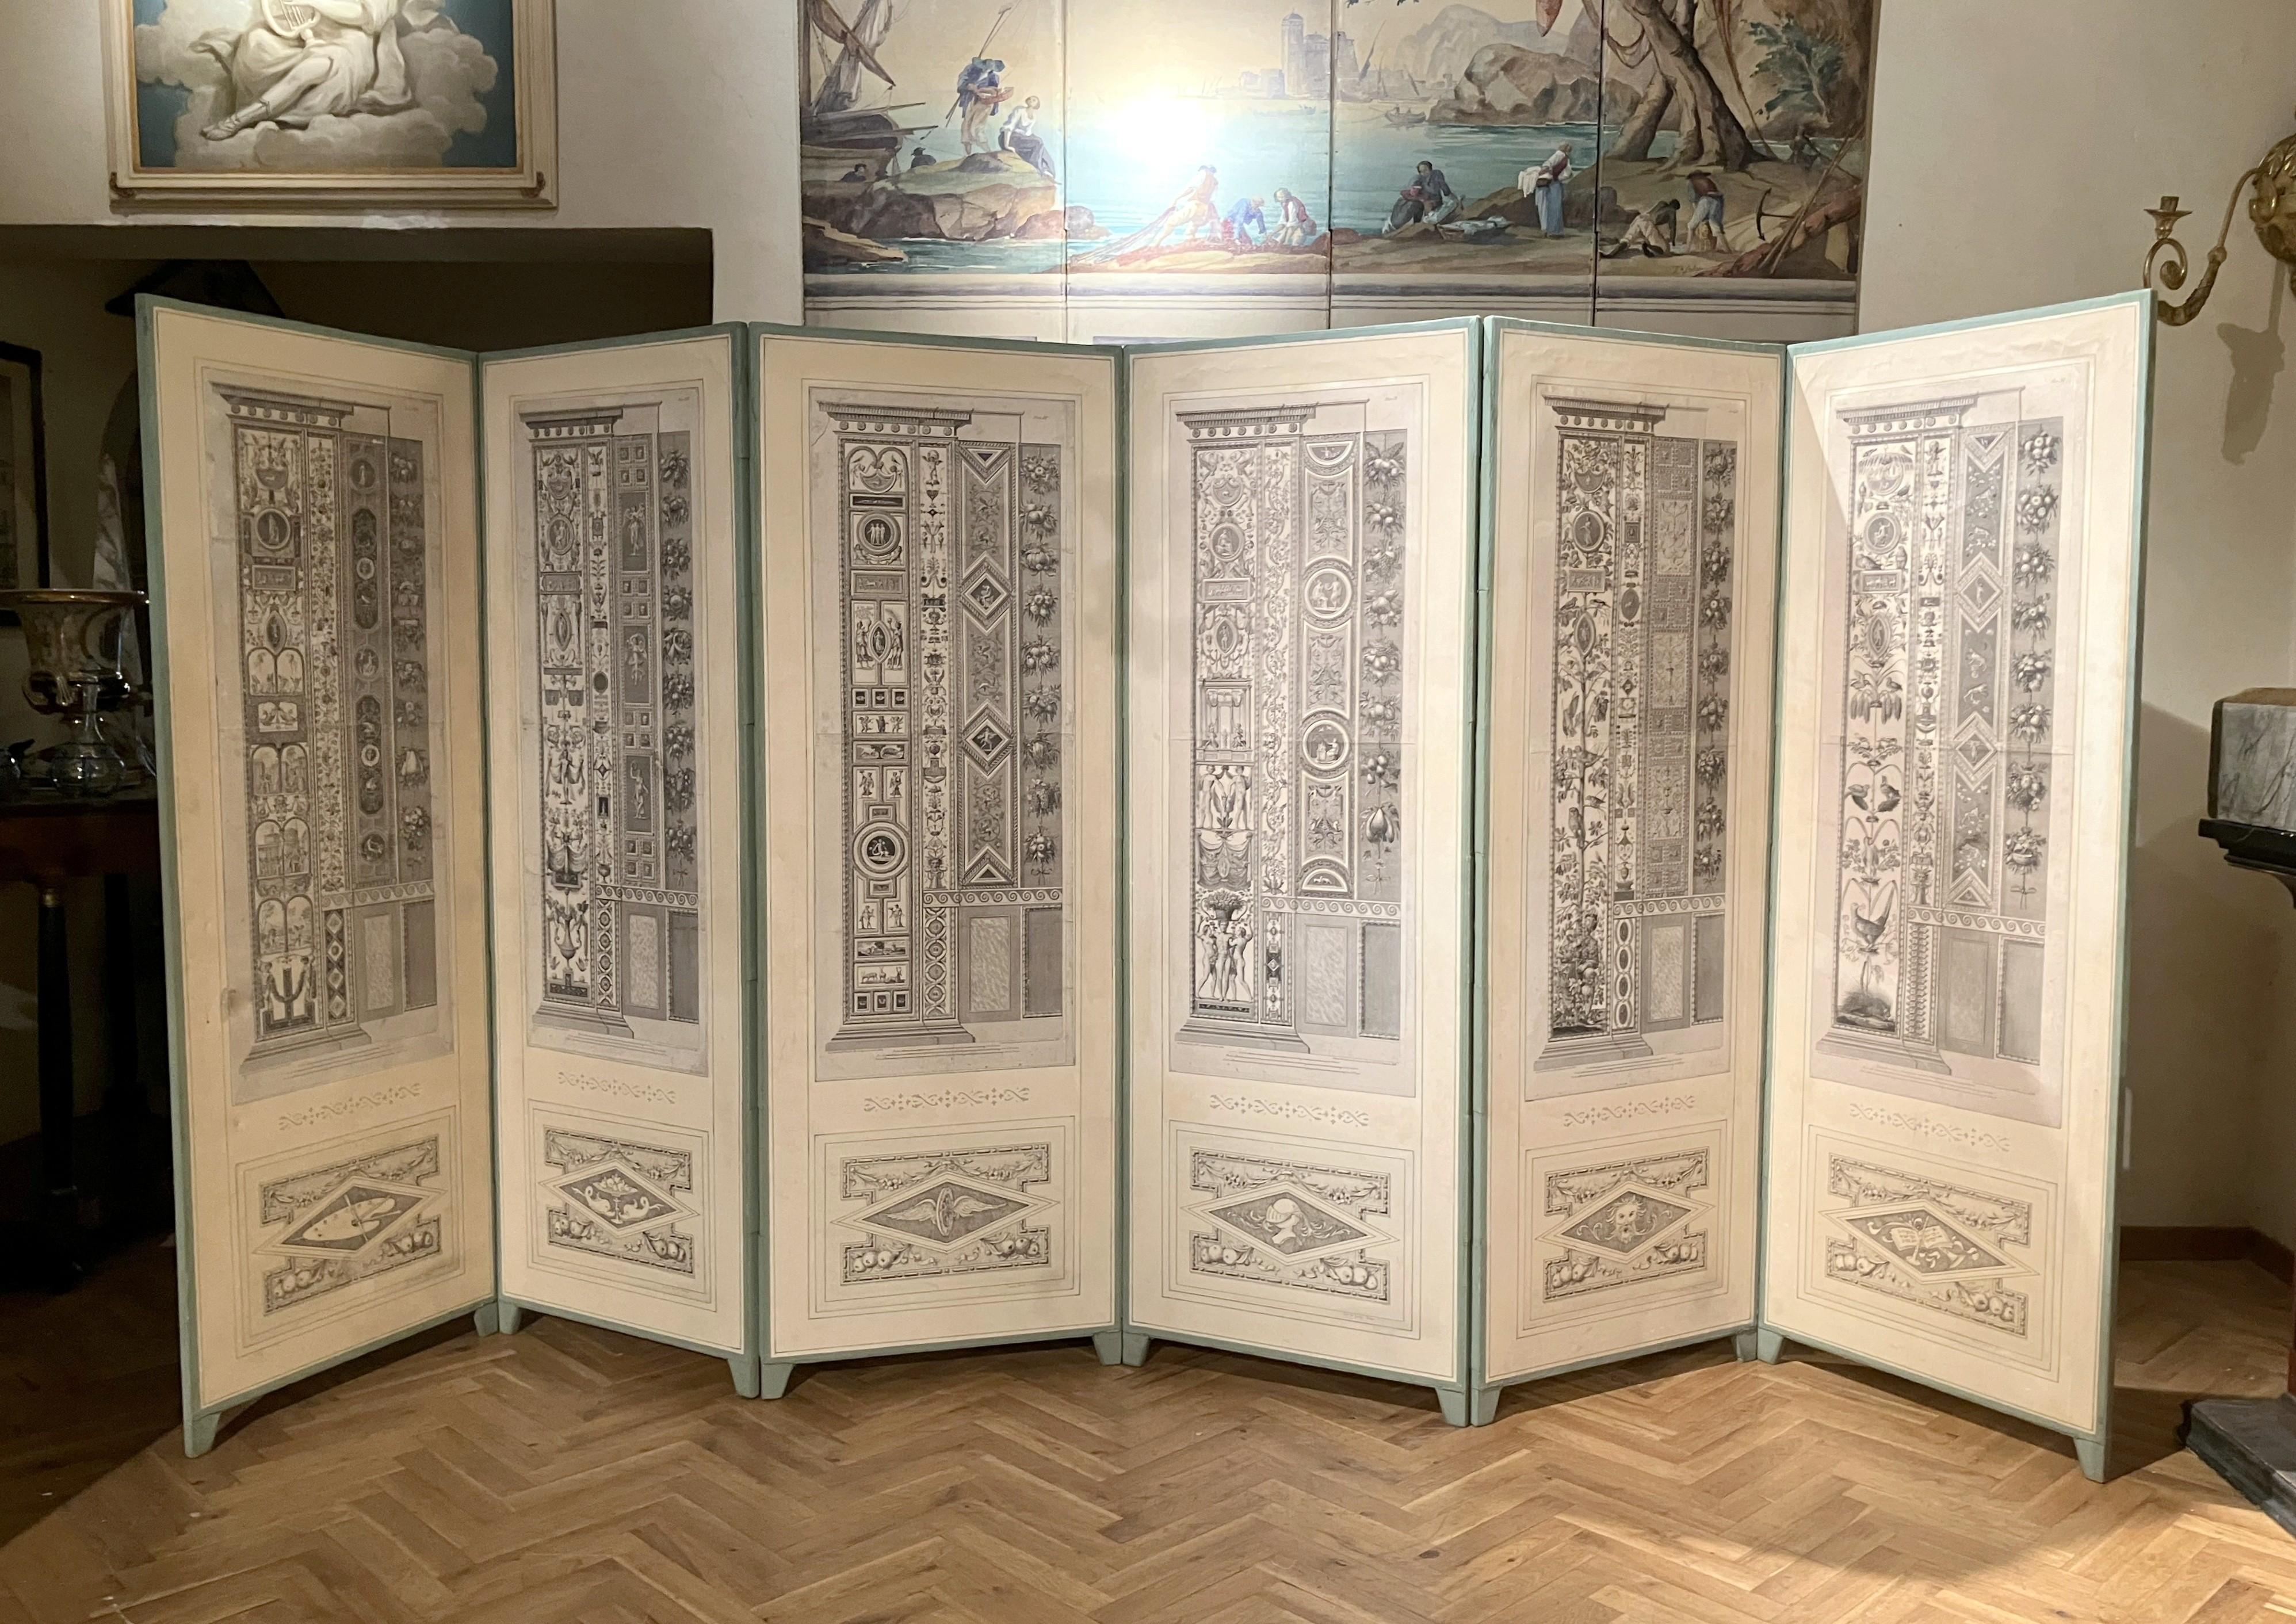 This Italian 18th century Neoclassical period folding screen consists of six panels with antiques etched and engraved copperplates on paper reproducing the frecoes painted by Raffaello Sanzio in the Vatican, known as ' The Vatican Loggia'. 
Each